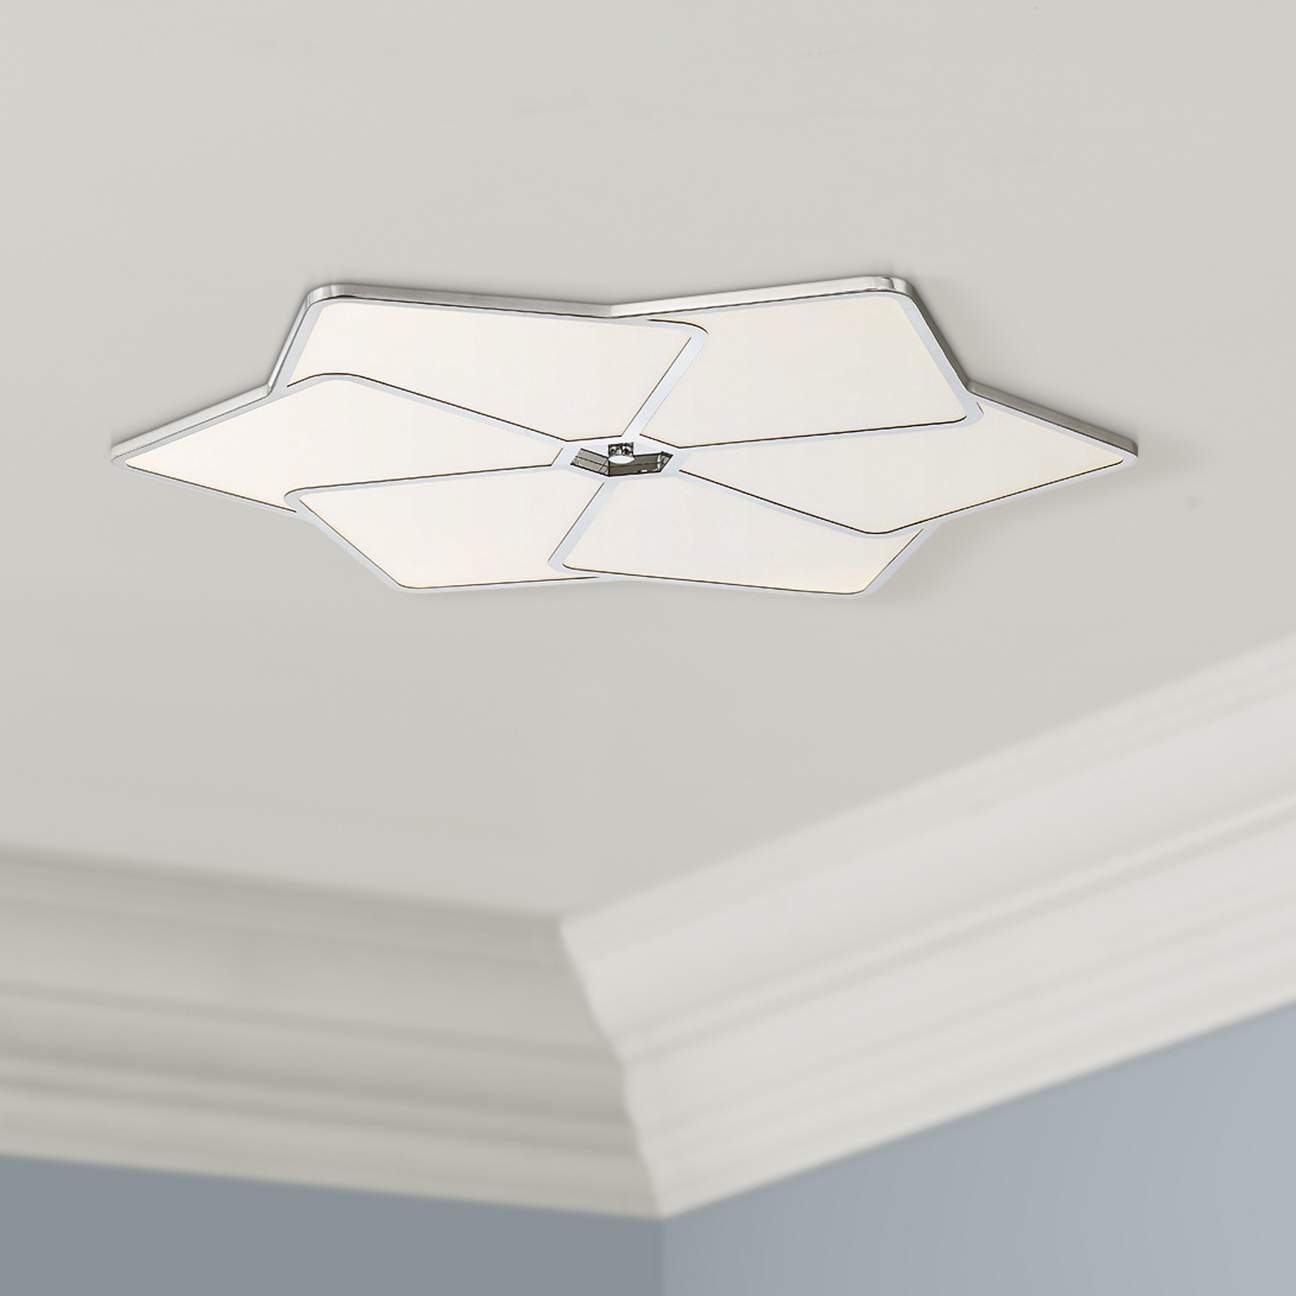 For Super Low Ceilings, Try an Ultra-Thin Light